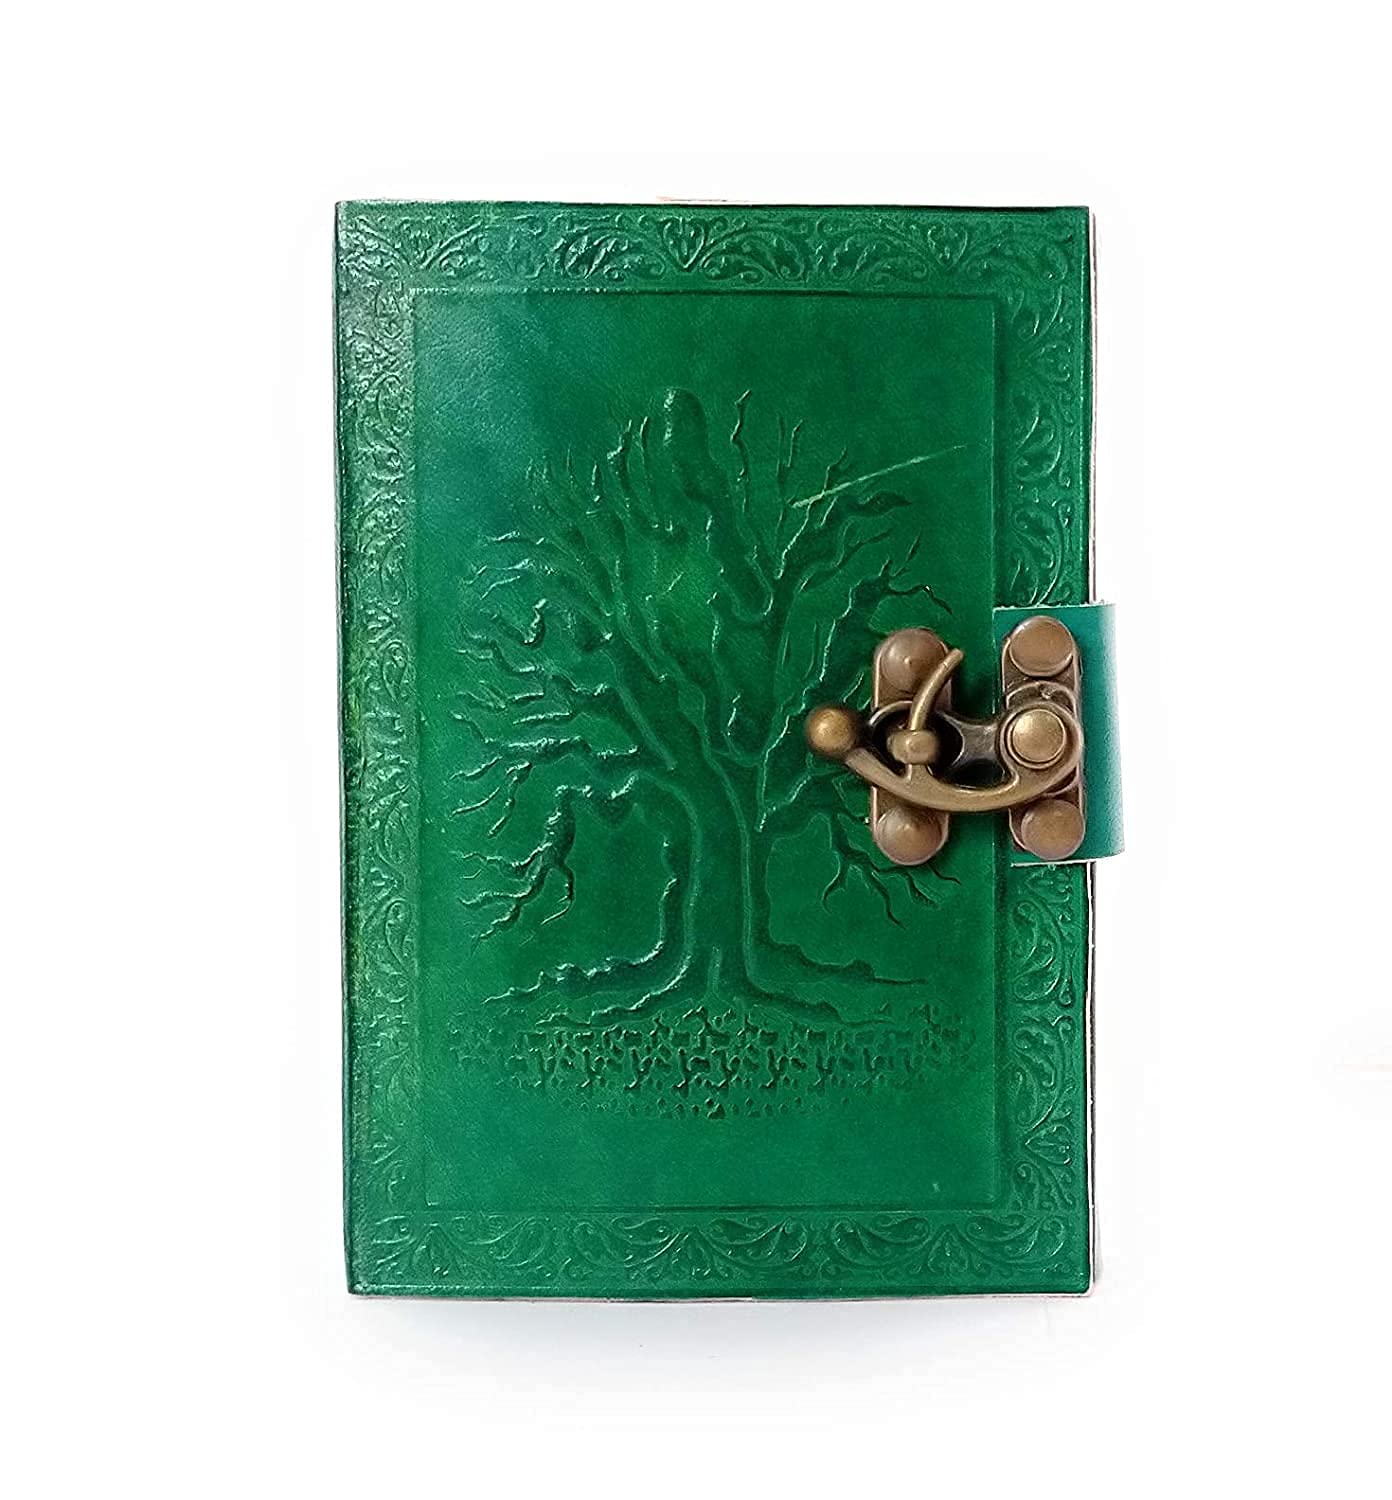 Handicrafts Leather Journals – Tree of Life Diary in Green Color Journal with Brass Lock